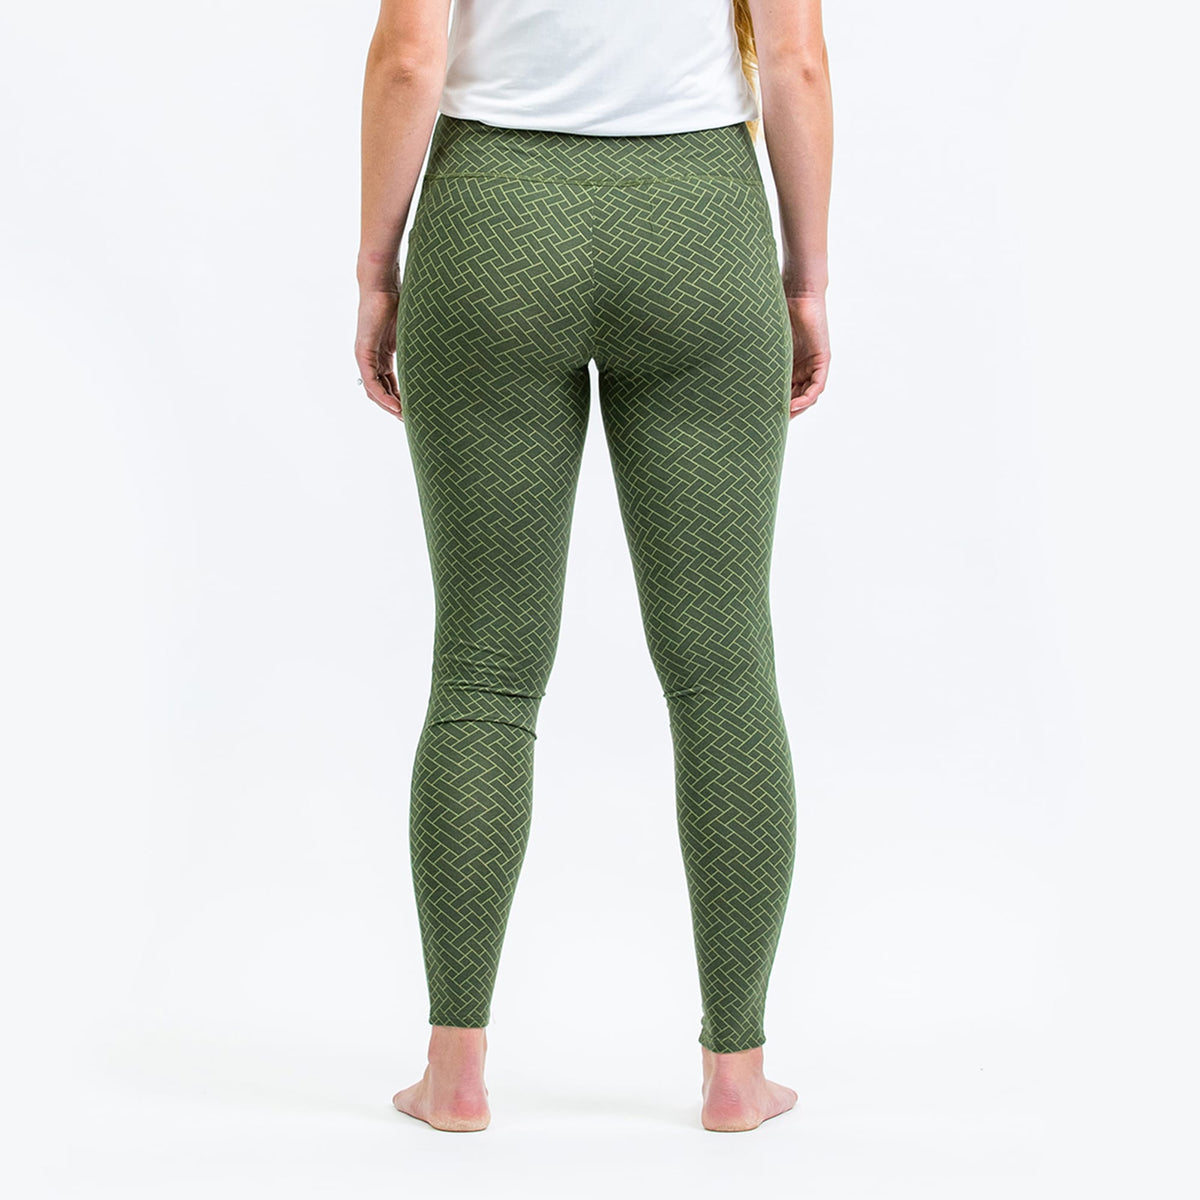 Women's Sueded Ankle Leggings: The Epitome of Softness and Sophistication